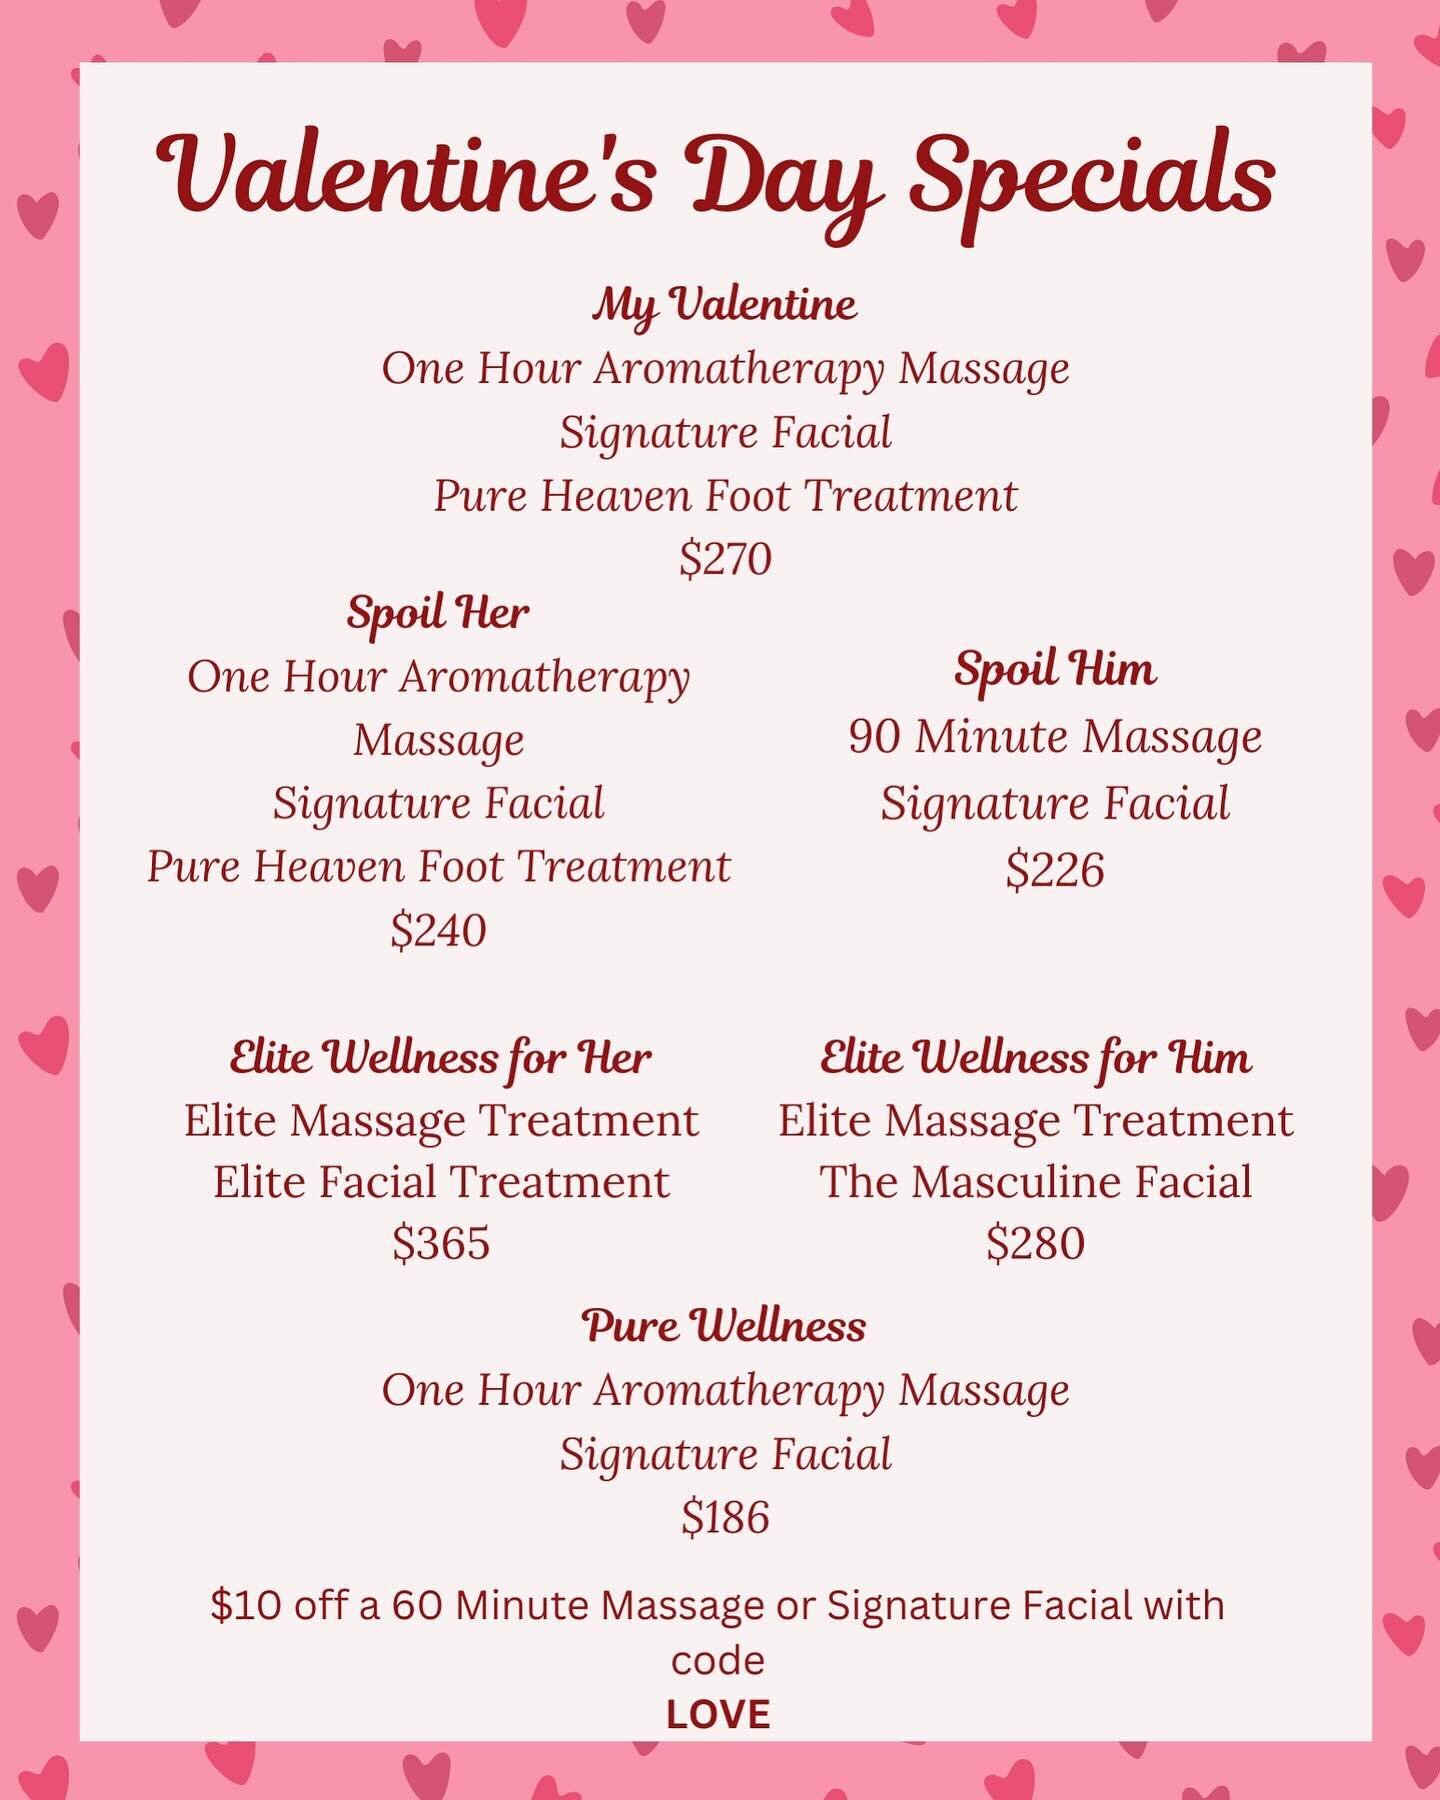 Get your Valentine the gift of a relaxing day at the spa! 🩷